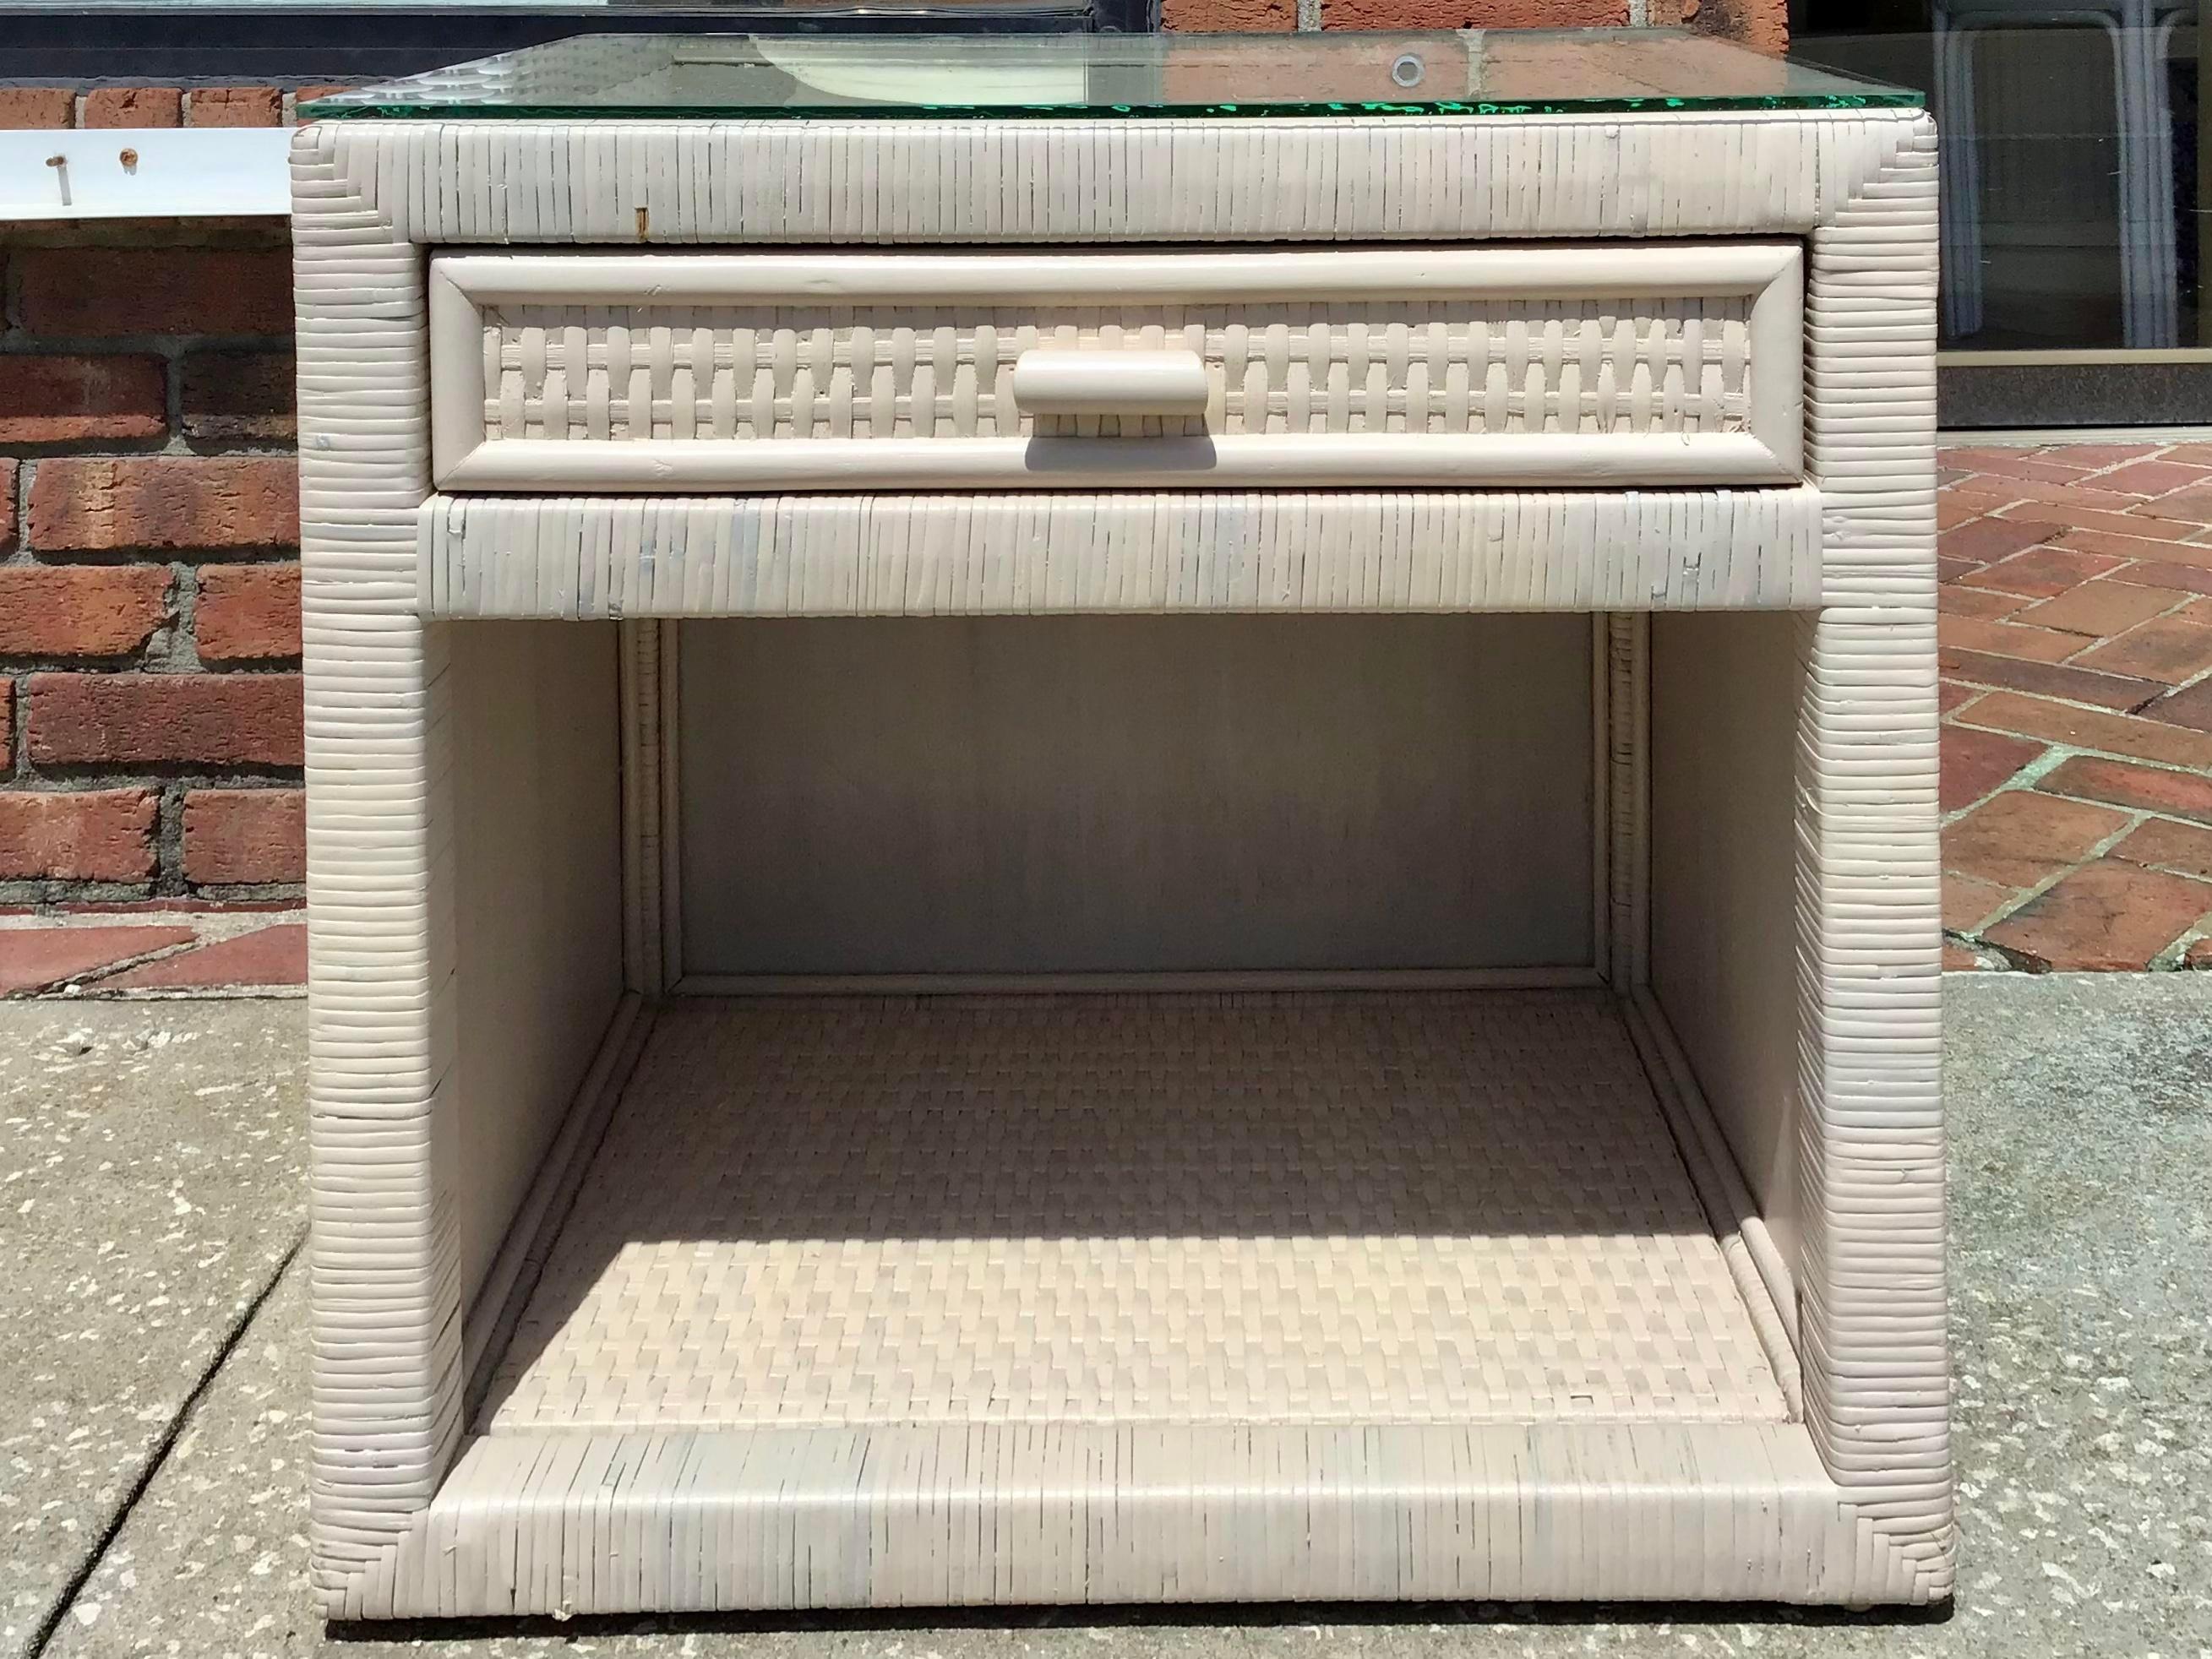 This is an unusual white washed finish Boho Chic Bielecky Brothers rattan nightstand with a drawer for storage. The white washed finish makes it an unusual color for a Bielecky Brothers signature design. This nightstand includes both practical and